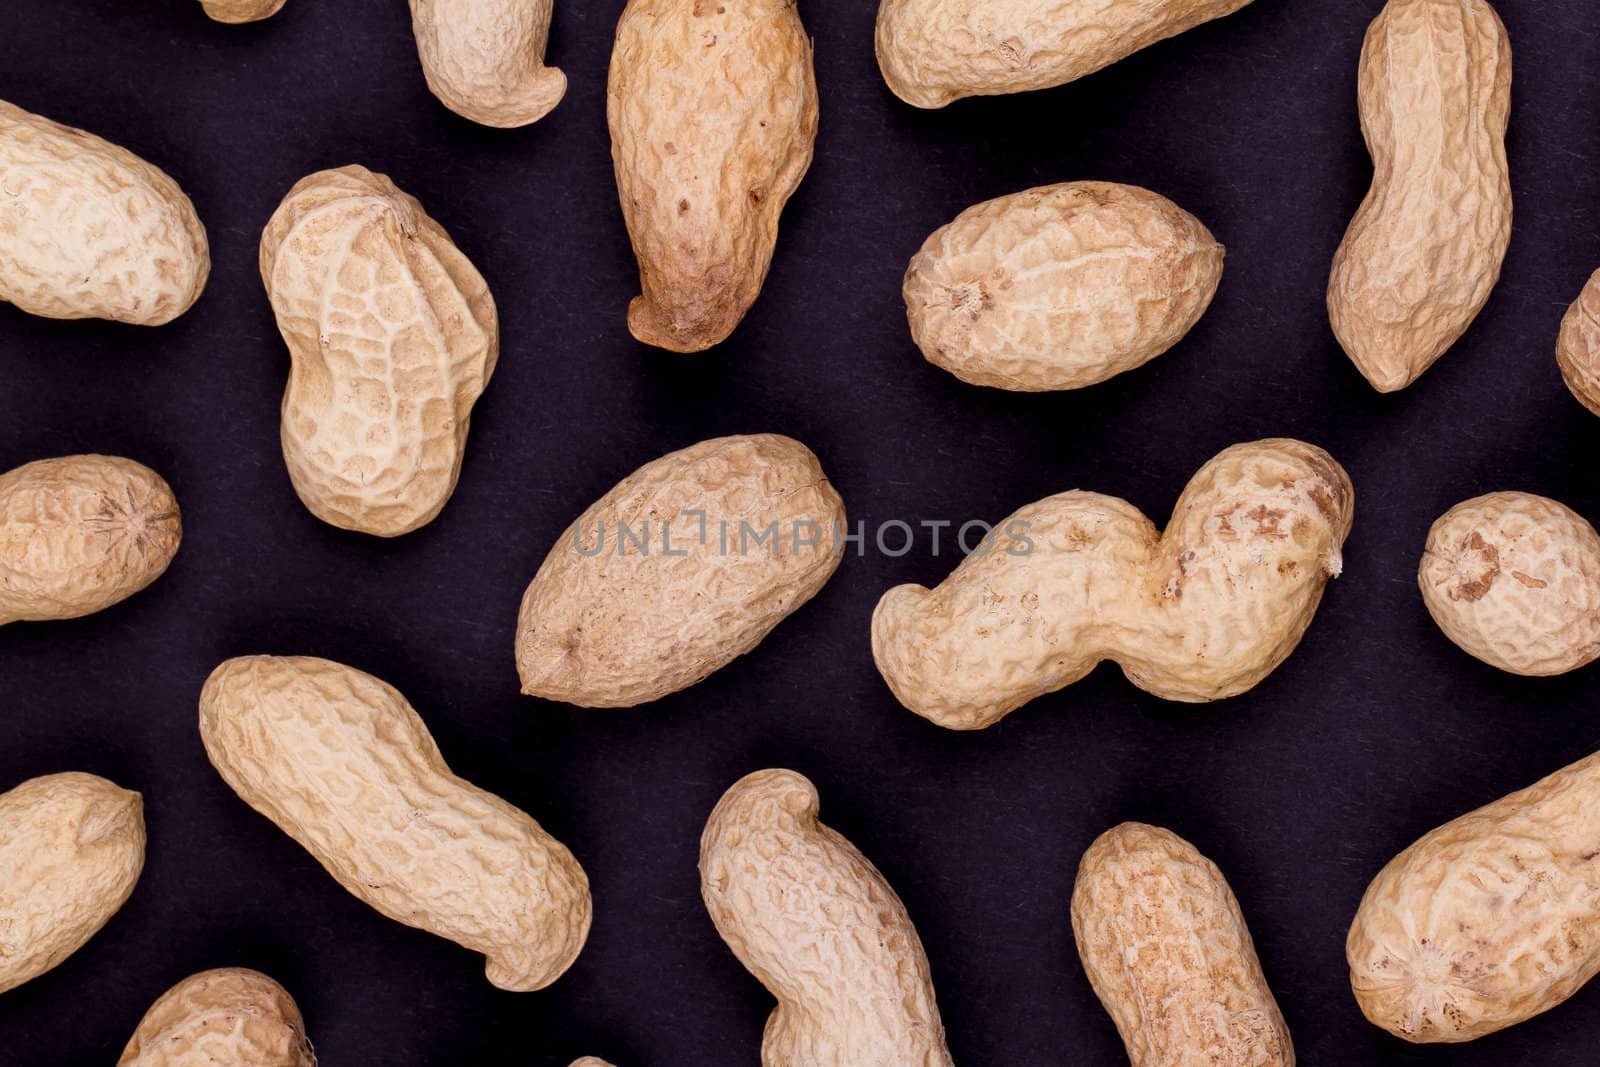 Roasted in-shell peanuts on a black background